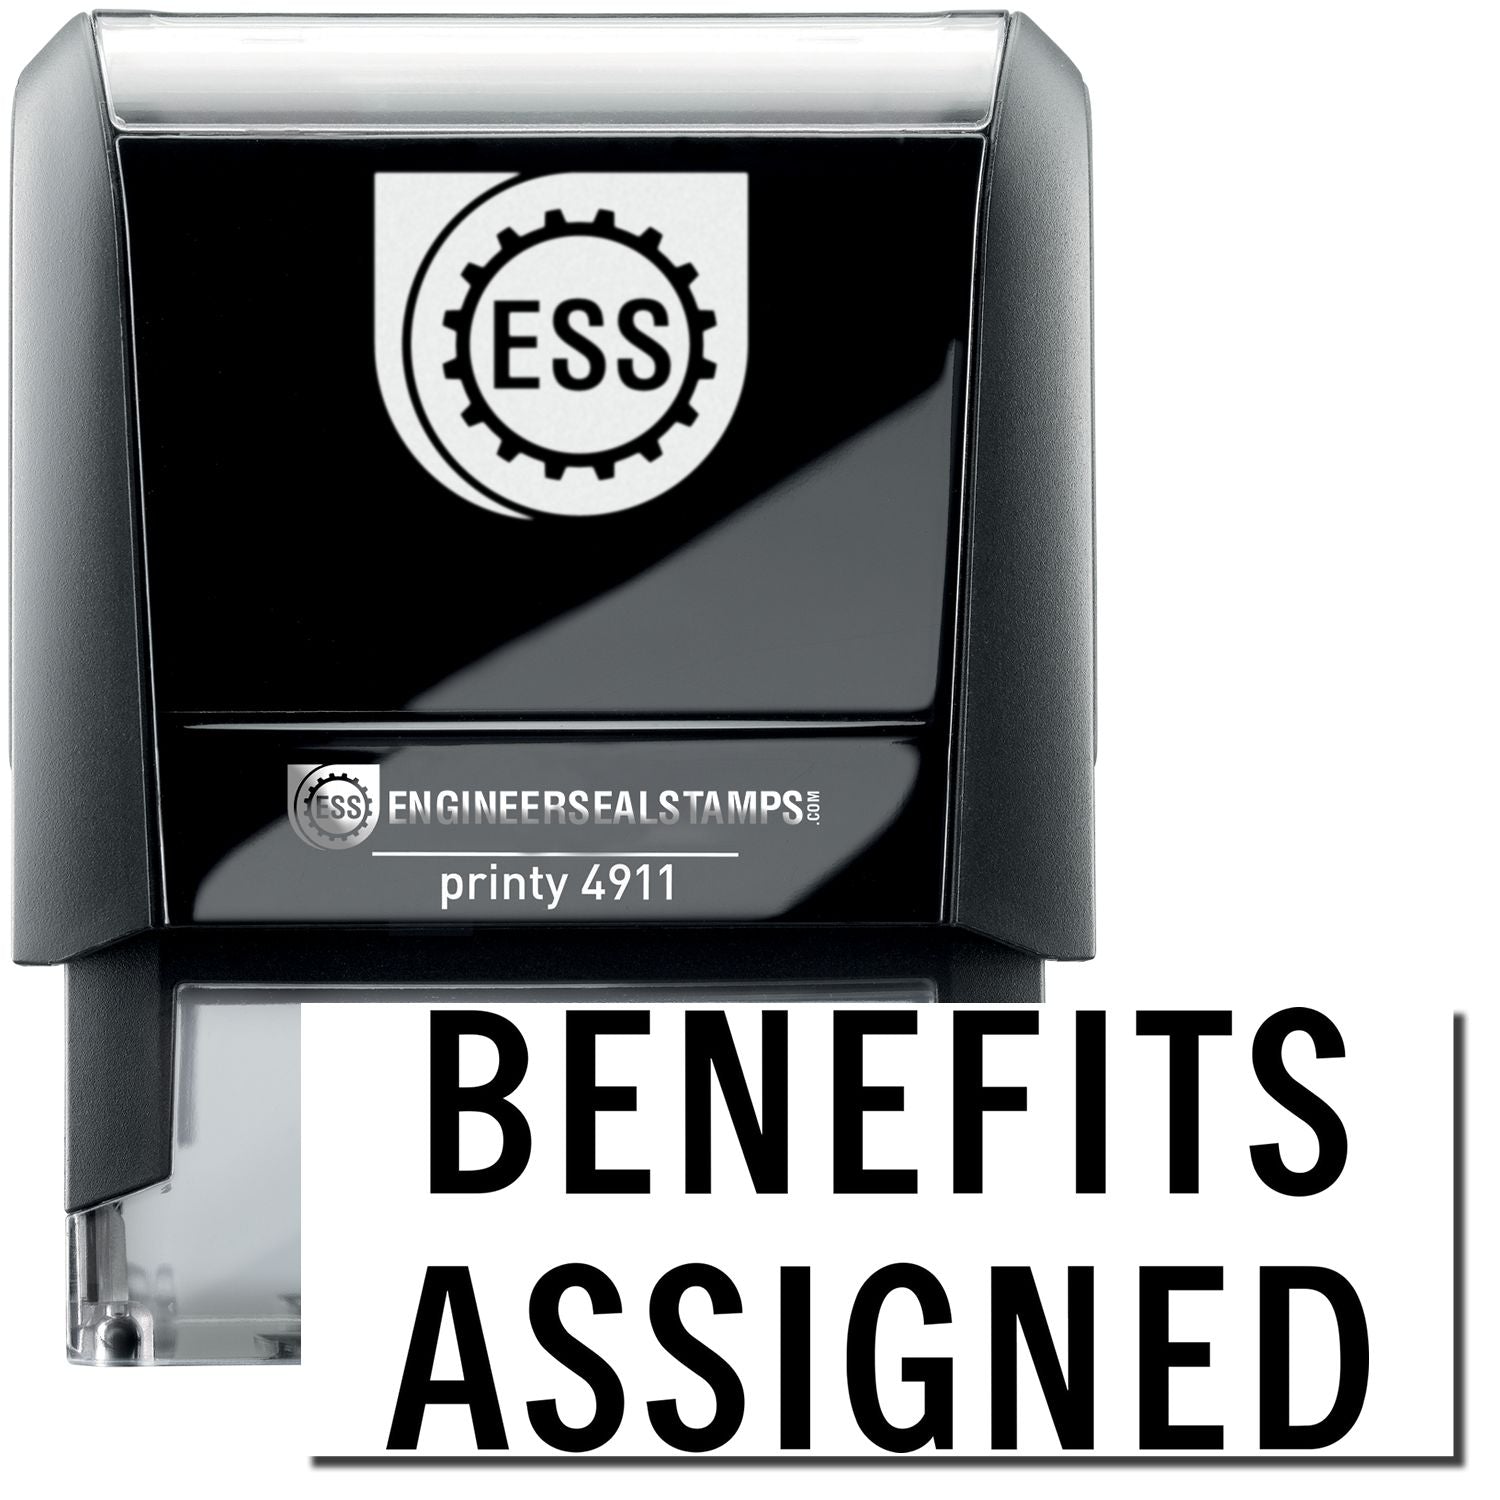 A self-inking stamp with a stamped image showing how the text "BENEFITS ASSIGNED" is displayed after stamping.